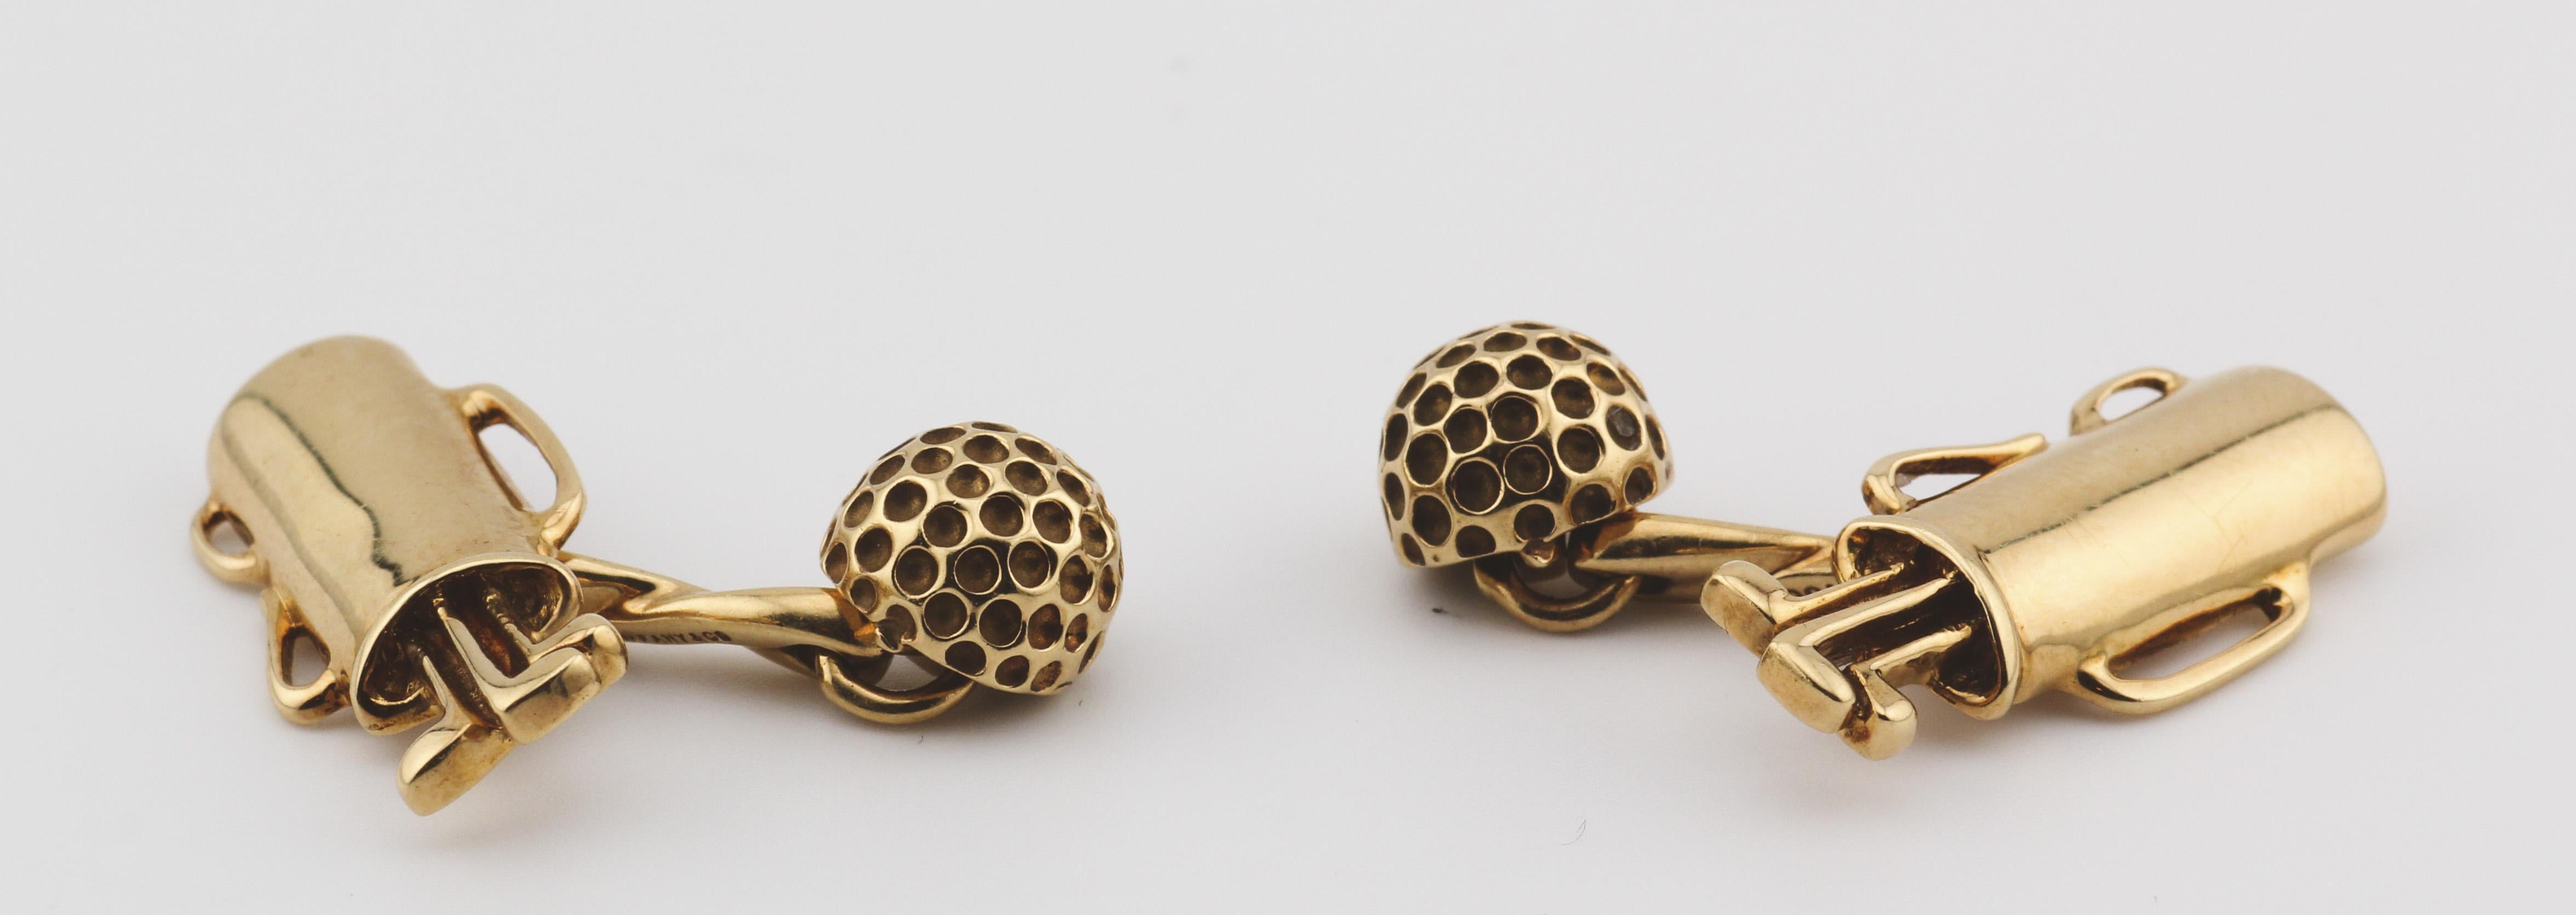 Tiffany & Co. 18k Yellow Gold Golf Motif Cufflinks In Good Condition For Sale In Bellmore, NY